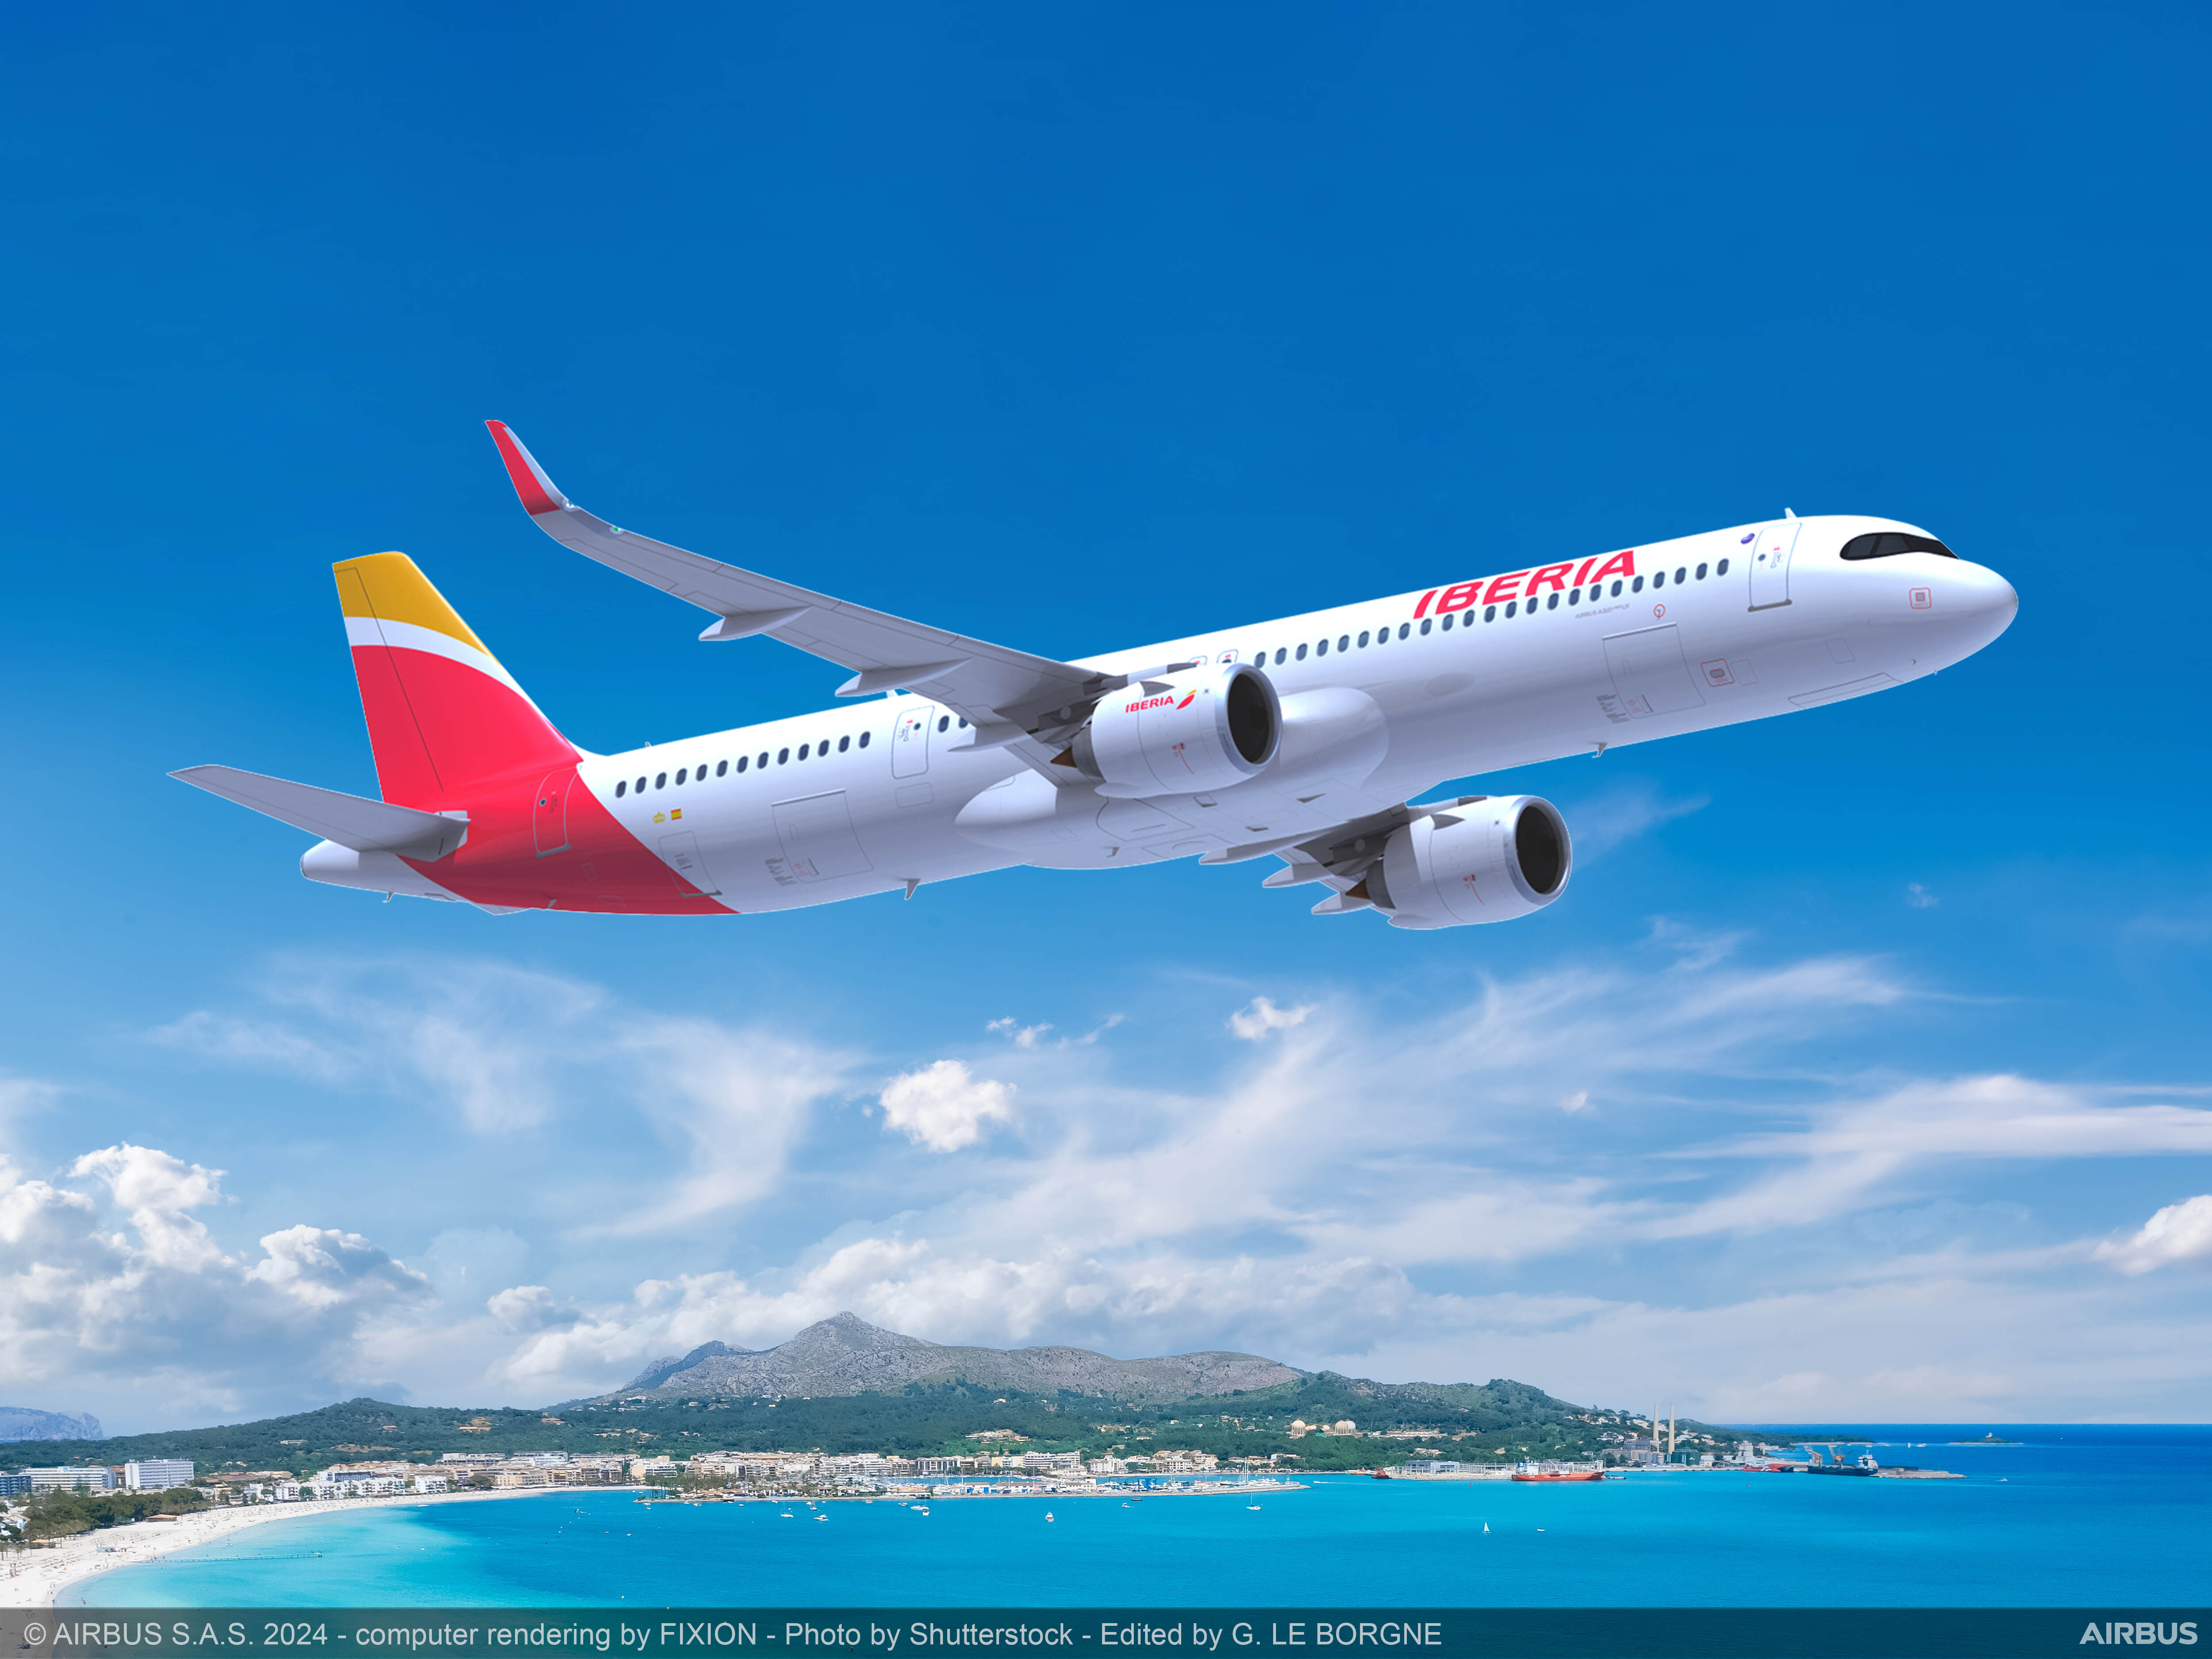 Iberia to become world’s first airline to fly Airbus A321XLR